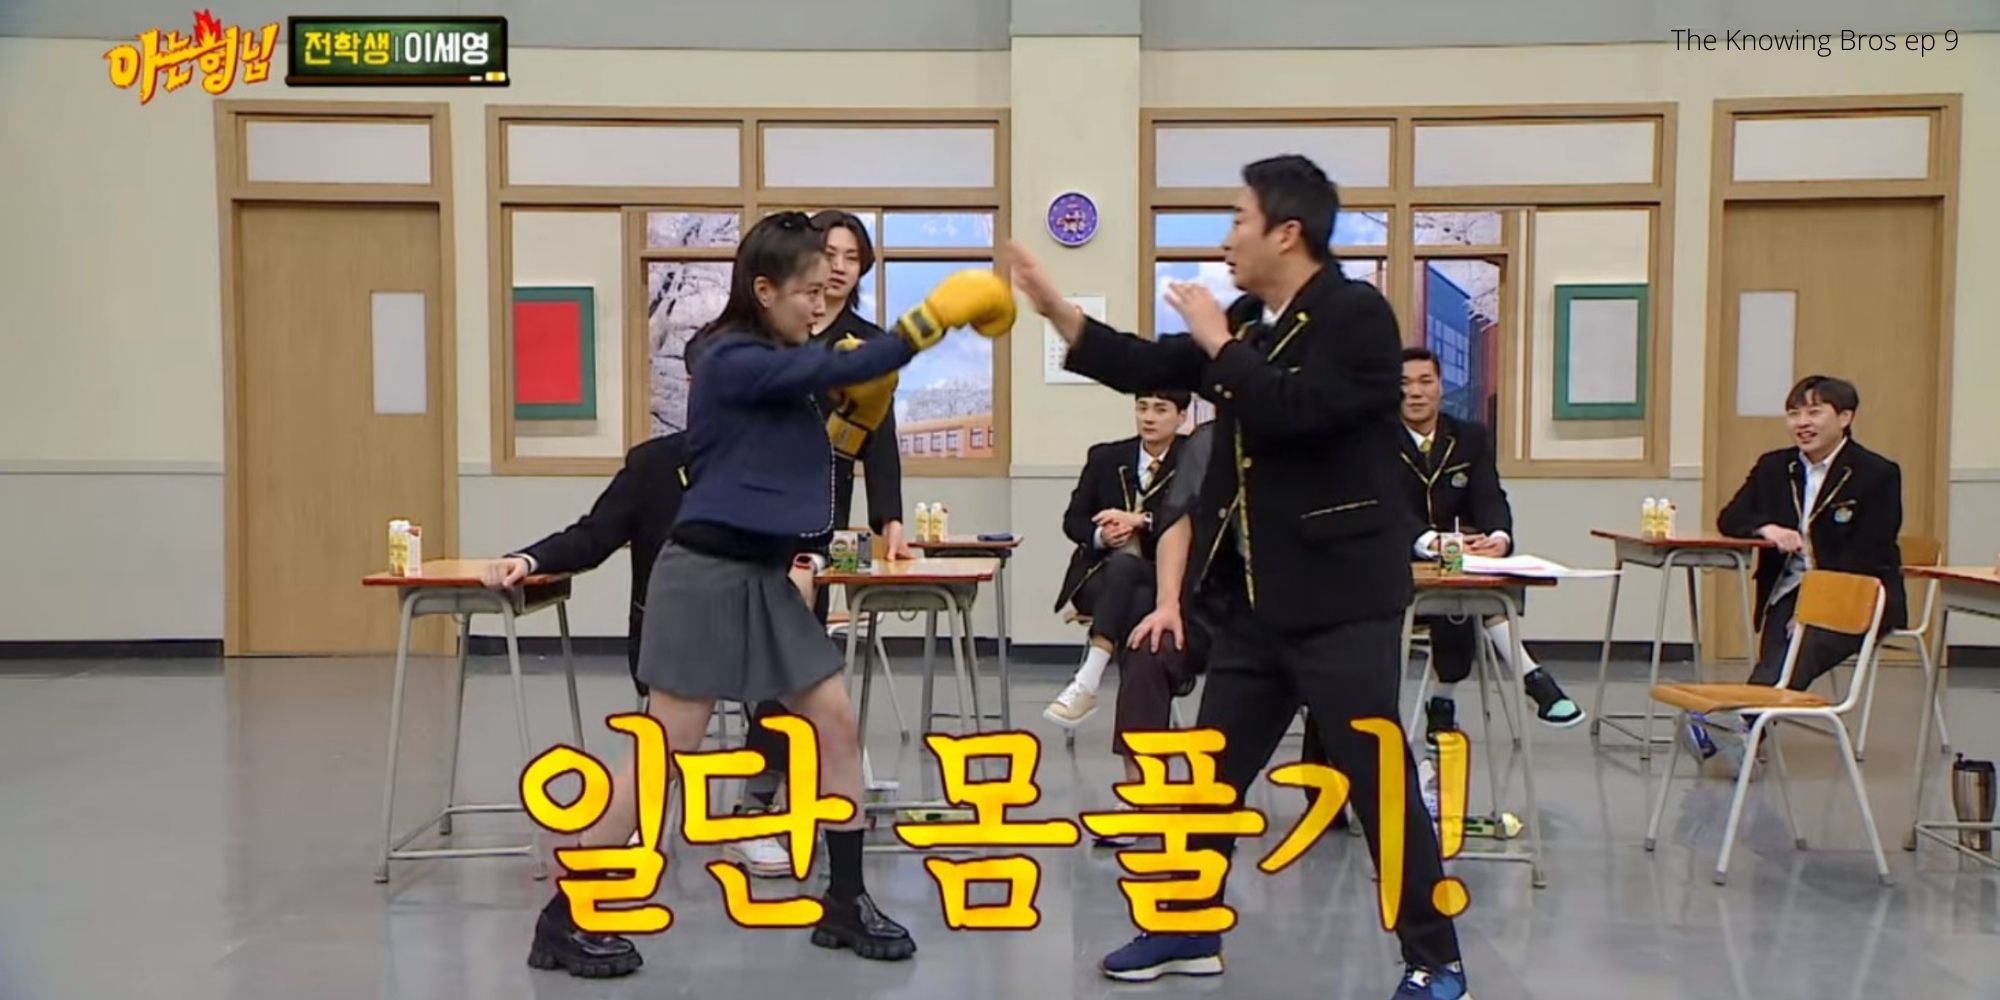 The Knowing Bros ep 9